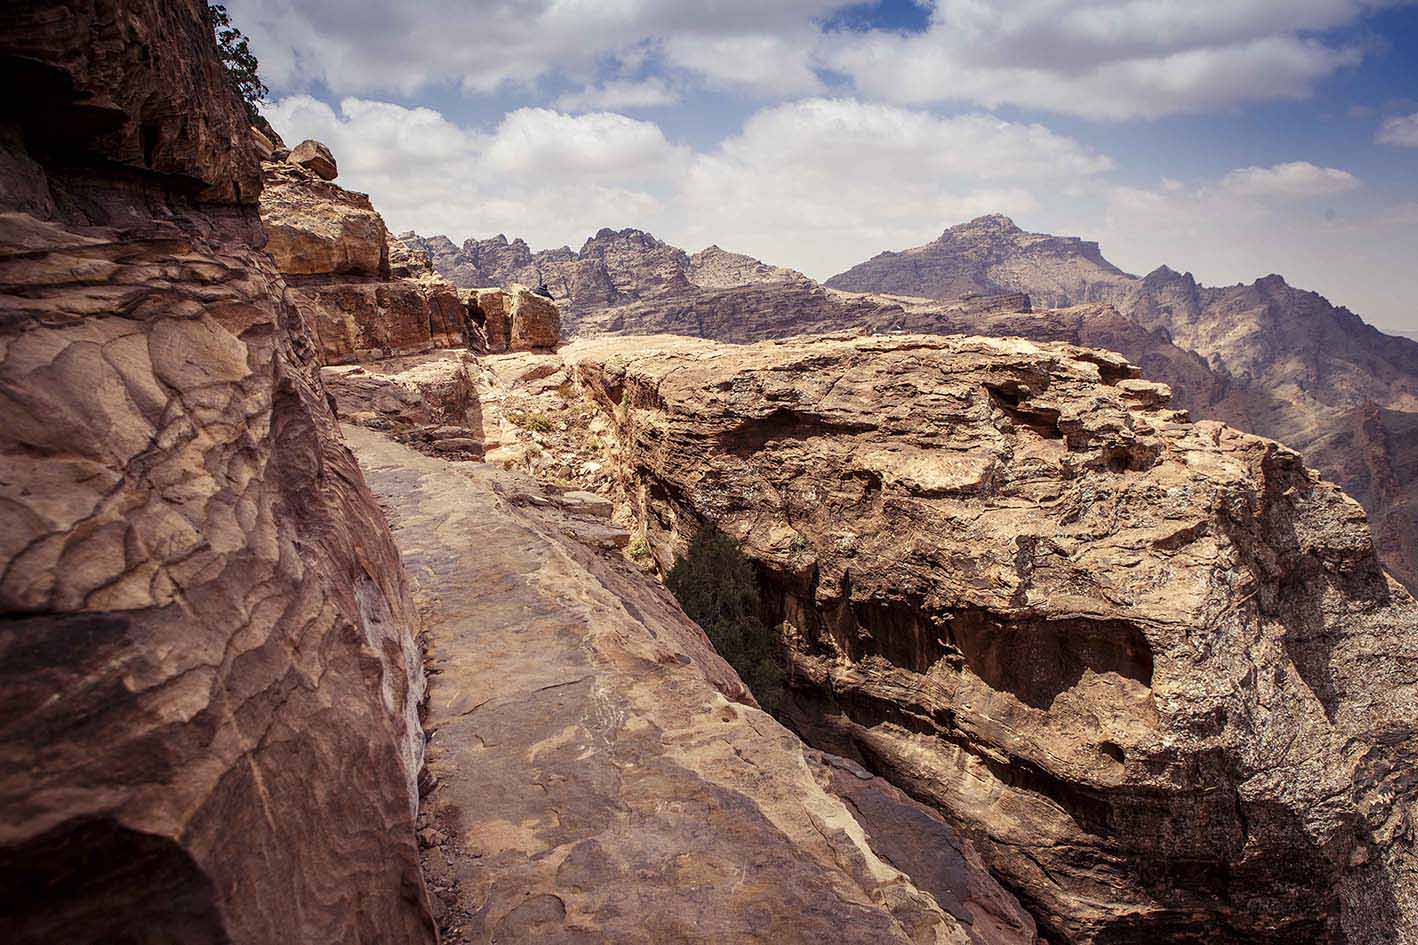 ~/Root_Storage/EN/EB_List_Page/Petra_-_Go_hiking_from_Little_Petra_to_the_monastery_Petra_Back_Door_Trail.jpg